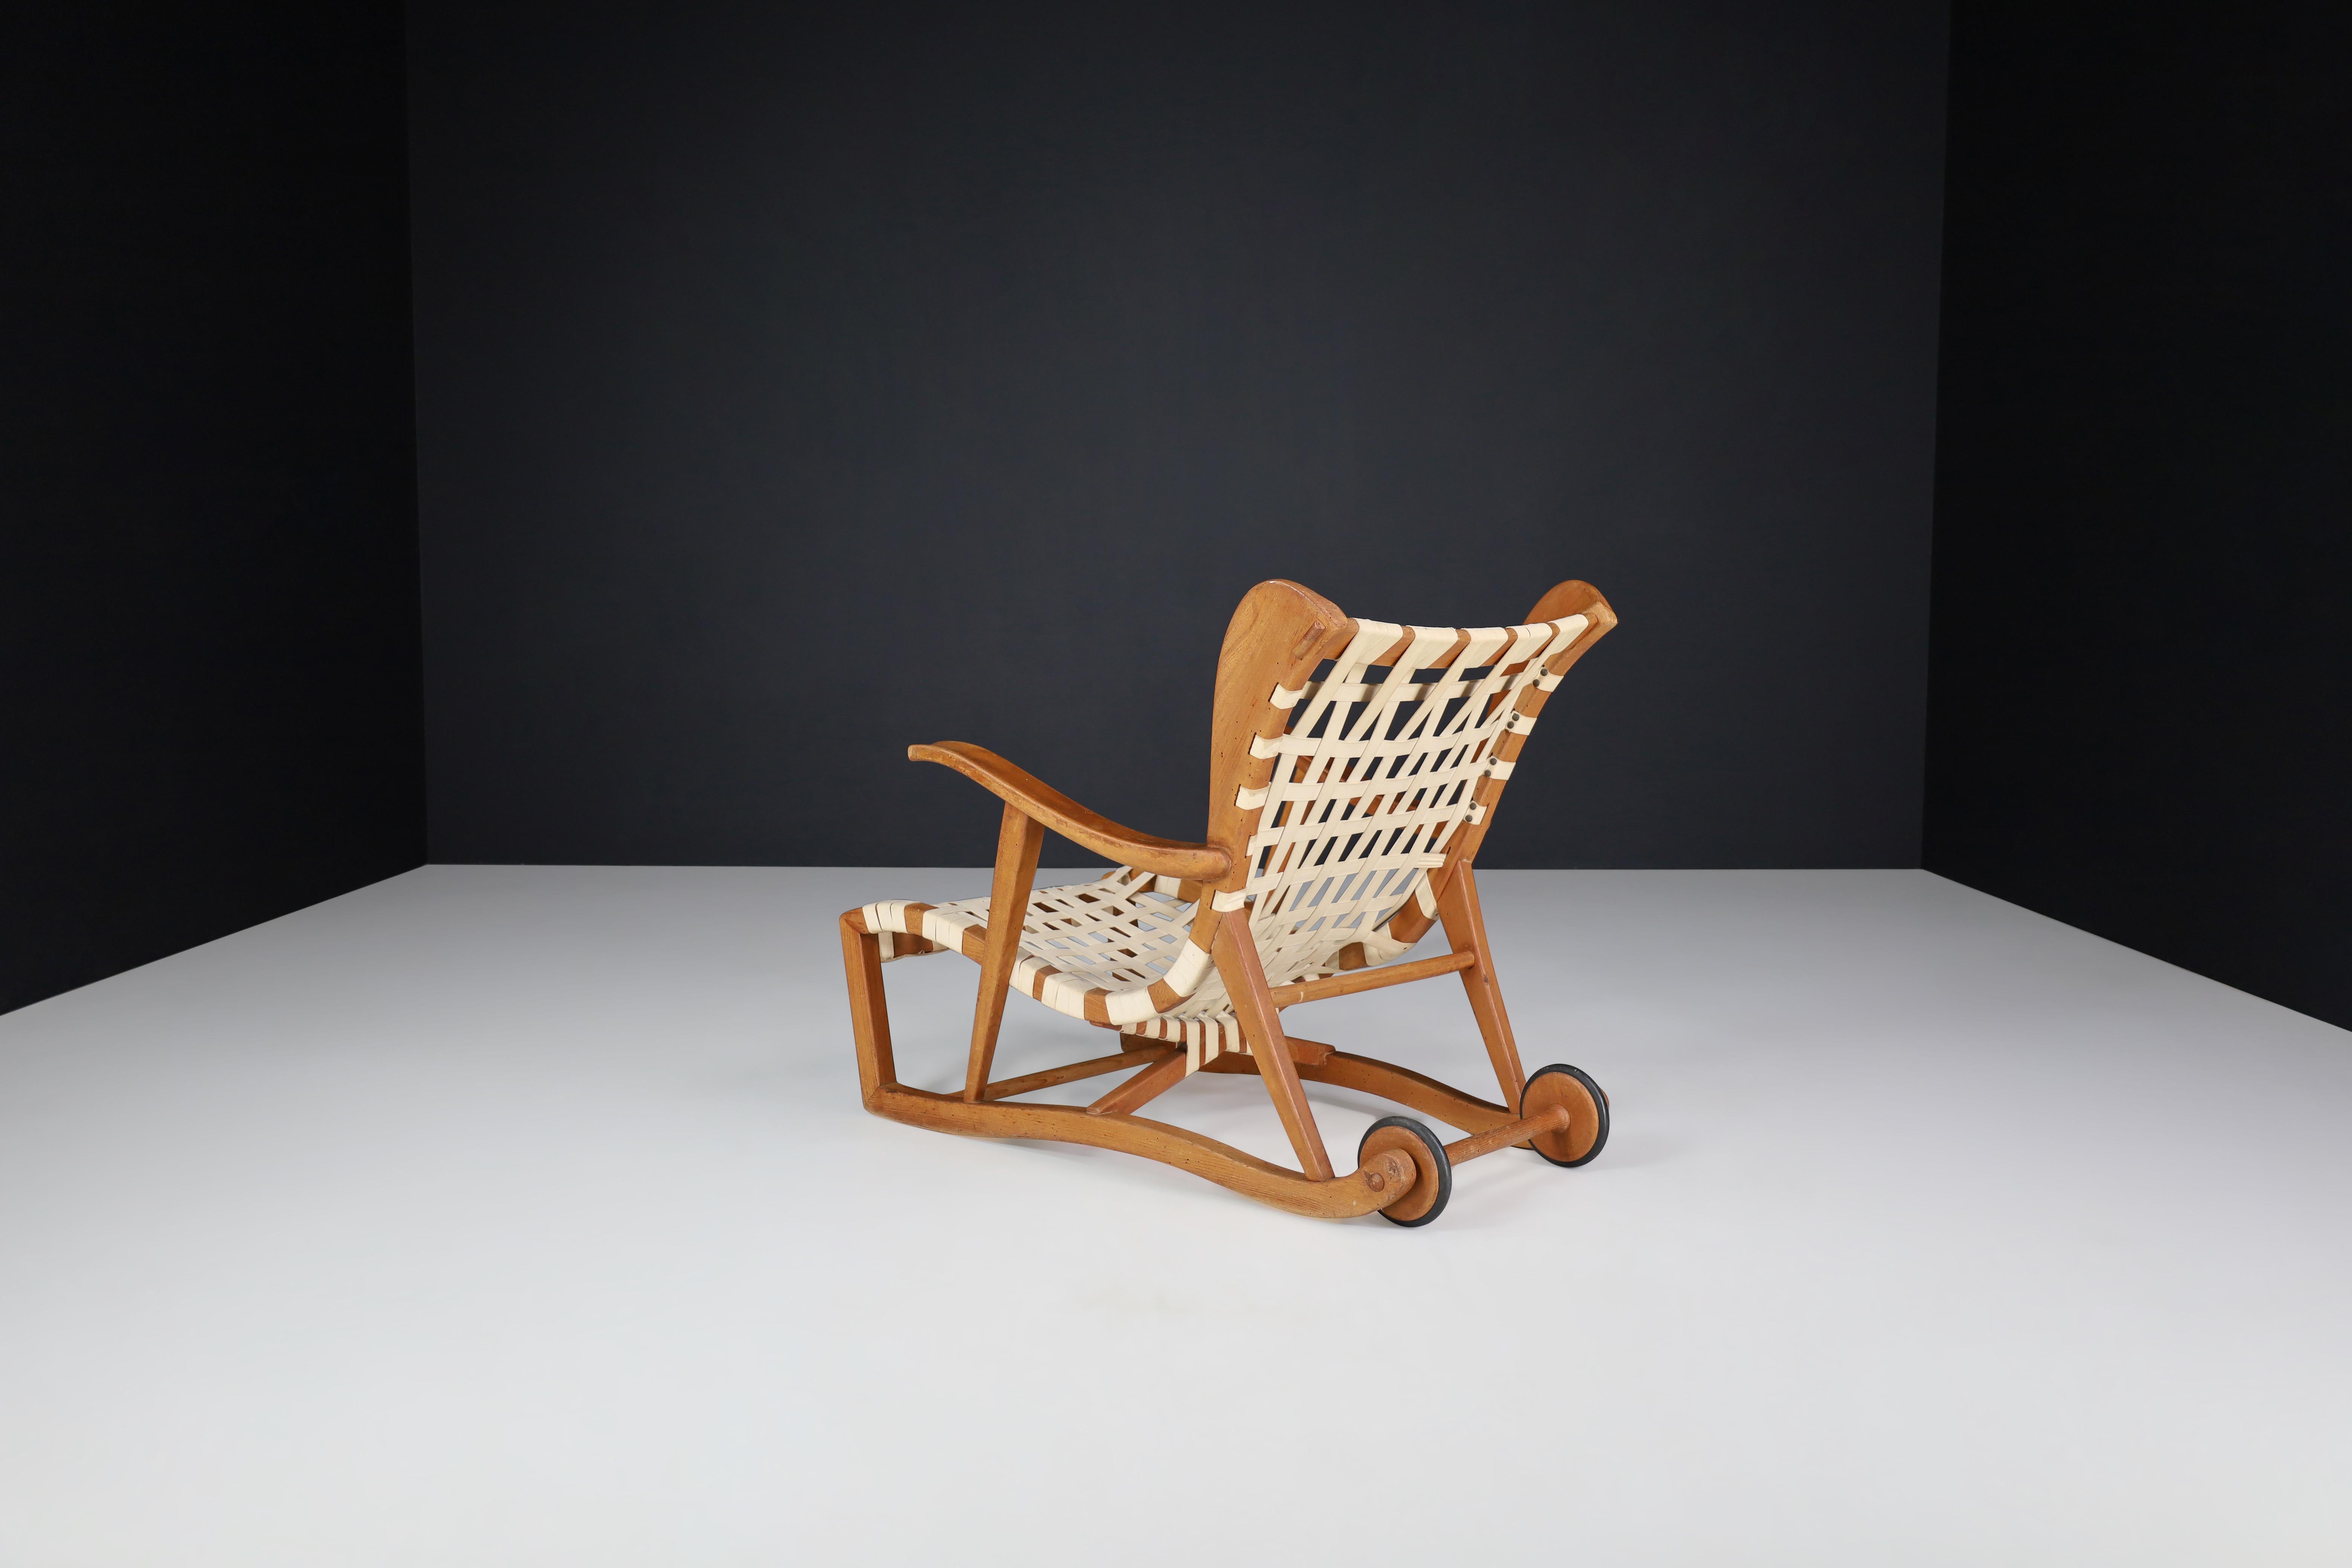 Sculptural Oak Lounge Chair by Guglielmo Pecorini, Italy, the 1950s For Sale 3